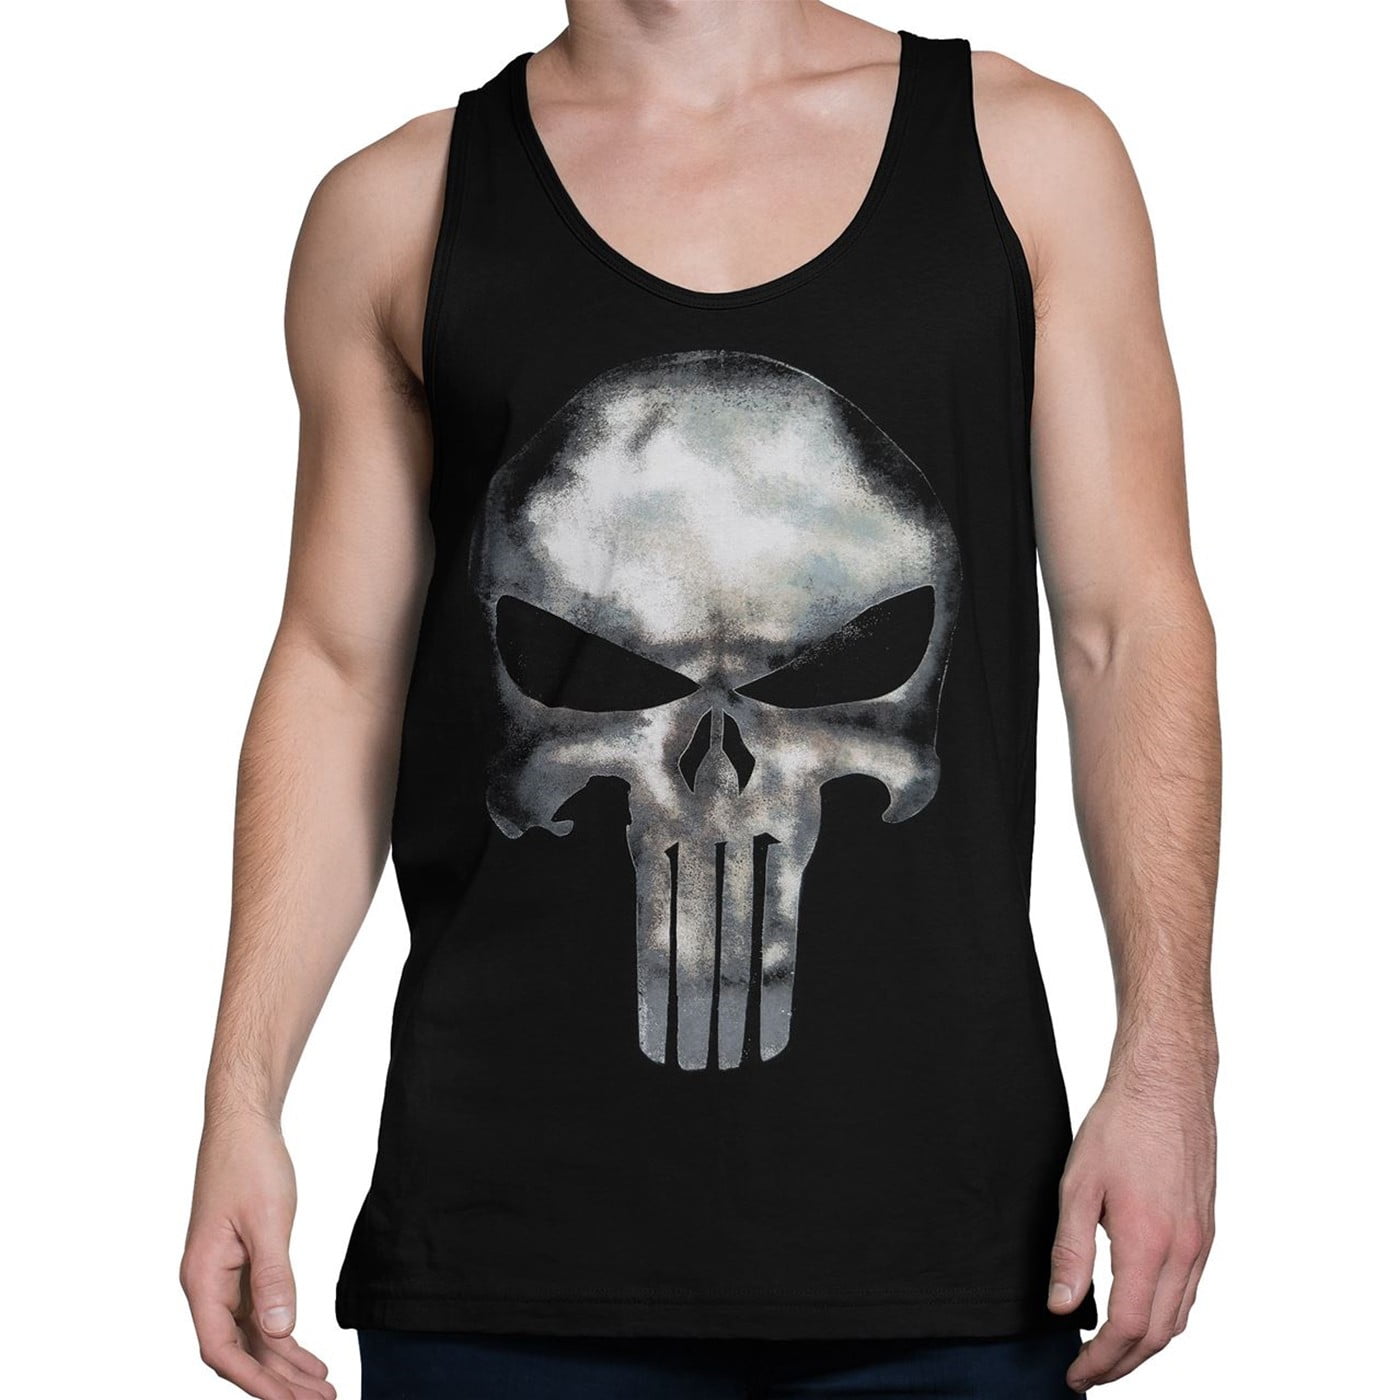 Mad Over Shirts Imma Get High and Drink Some Beer Unisex Premium Tank Top